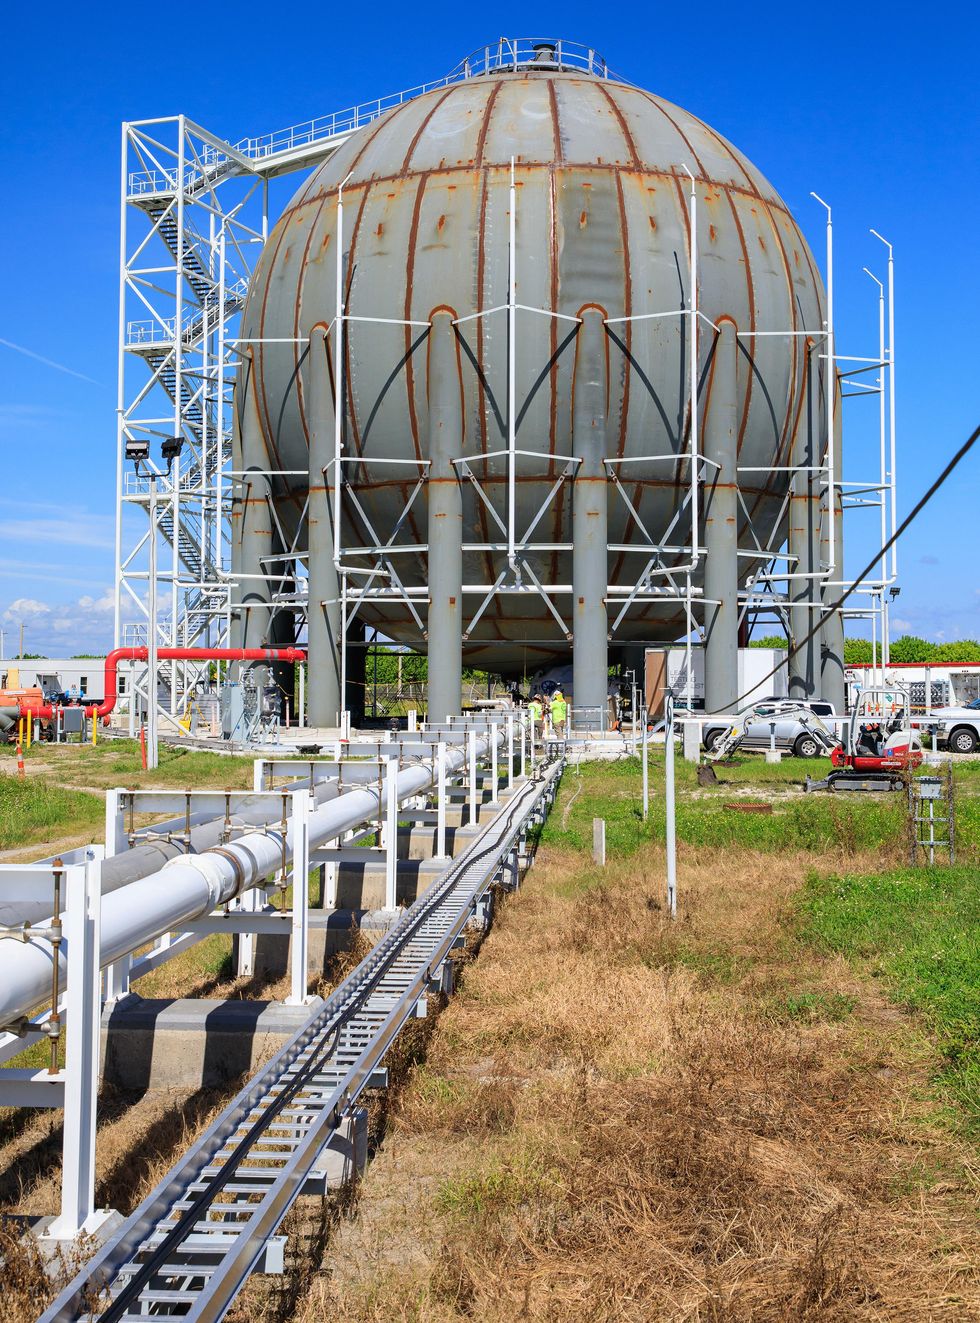 This photograph shows a giant spherical storage tank with an adjacent stairway to the top and pipes leading to it that are close to the ground.